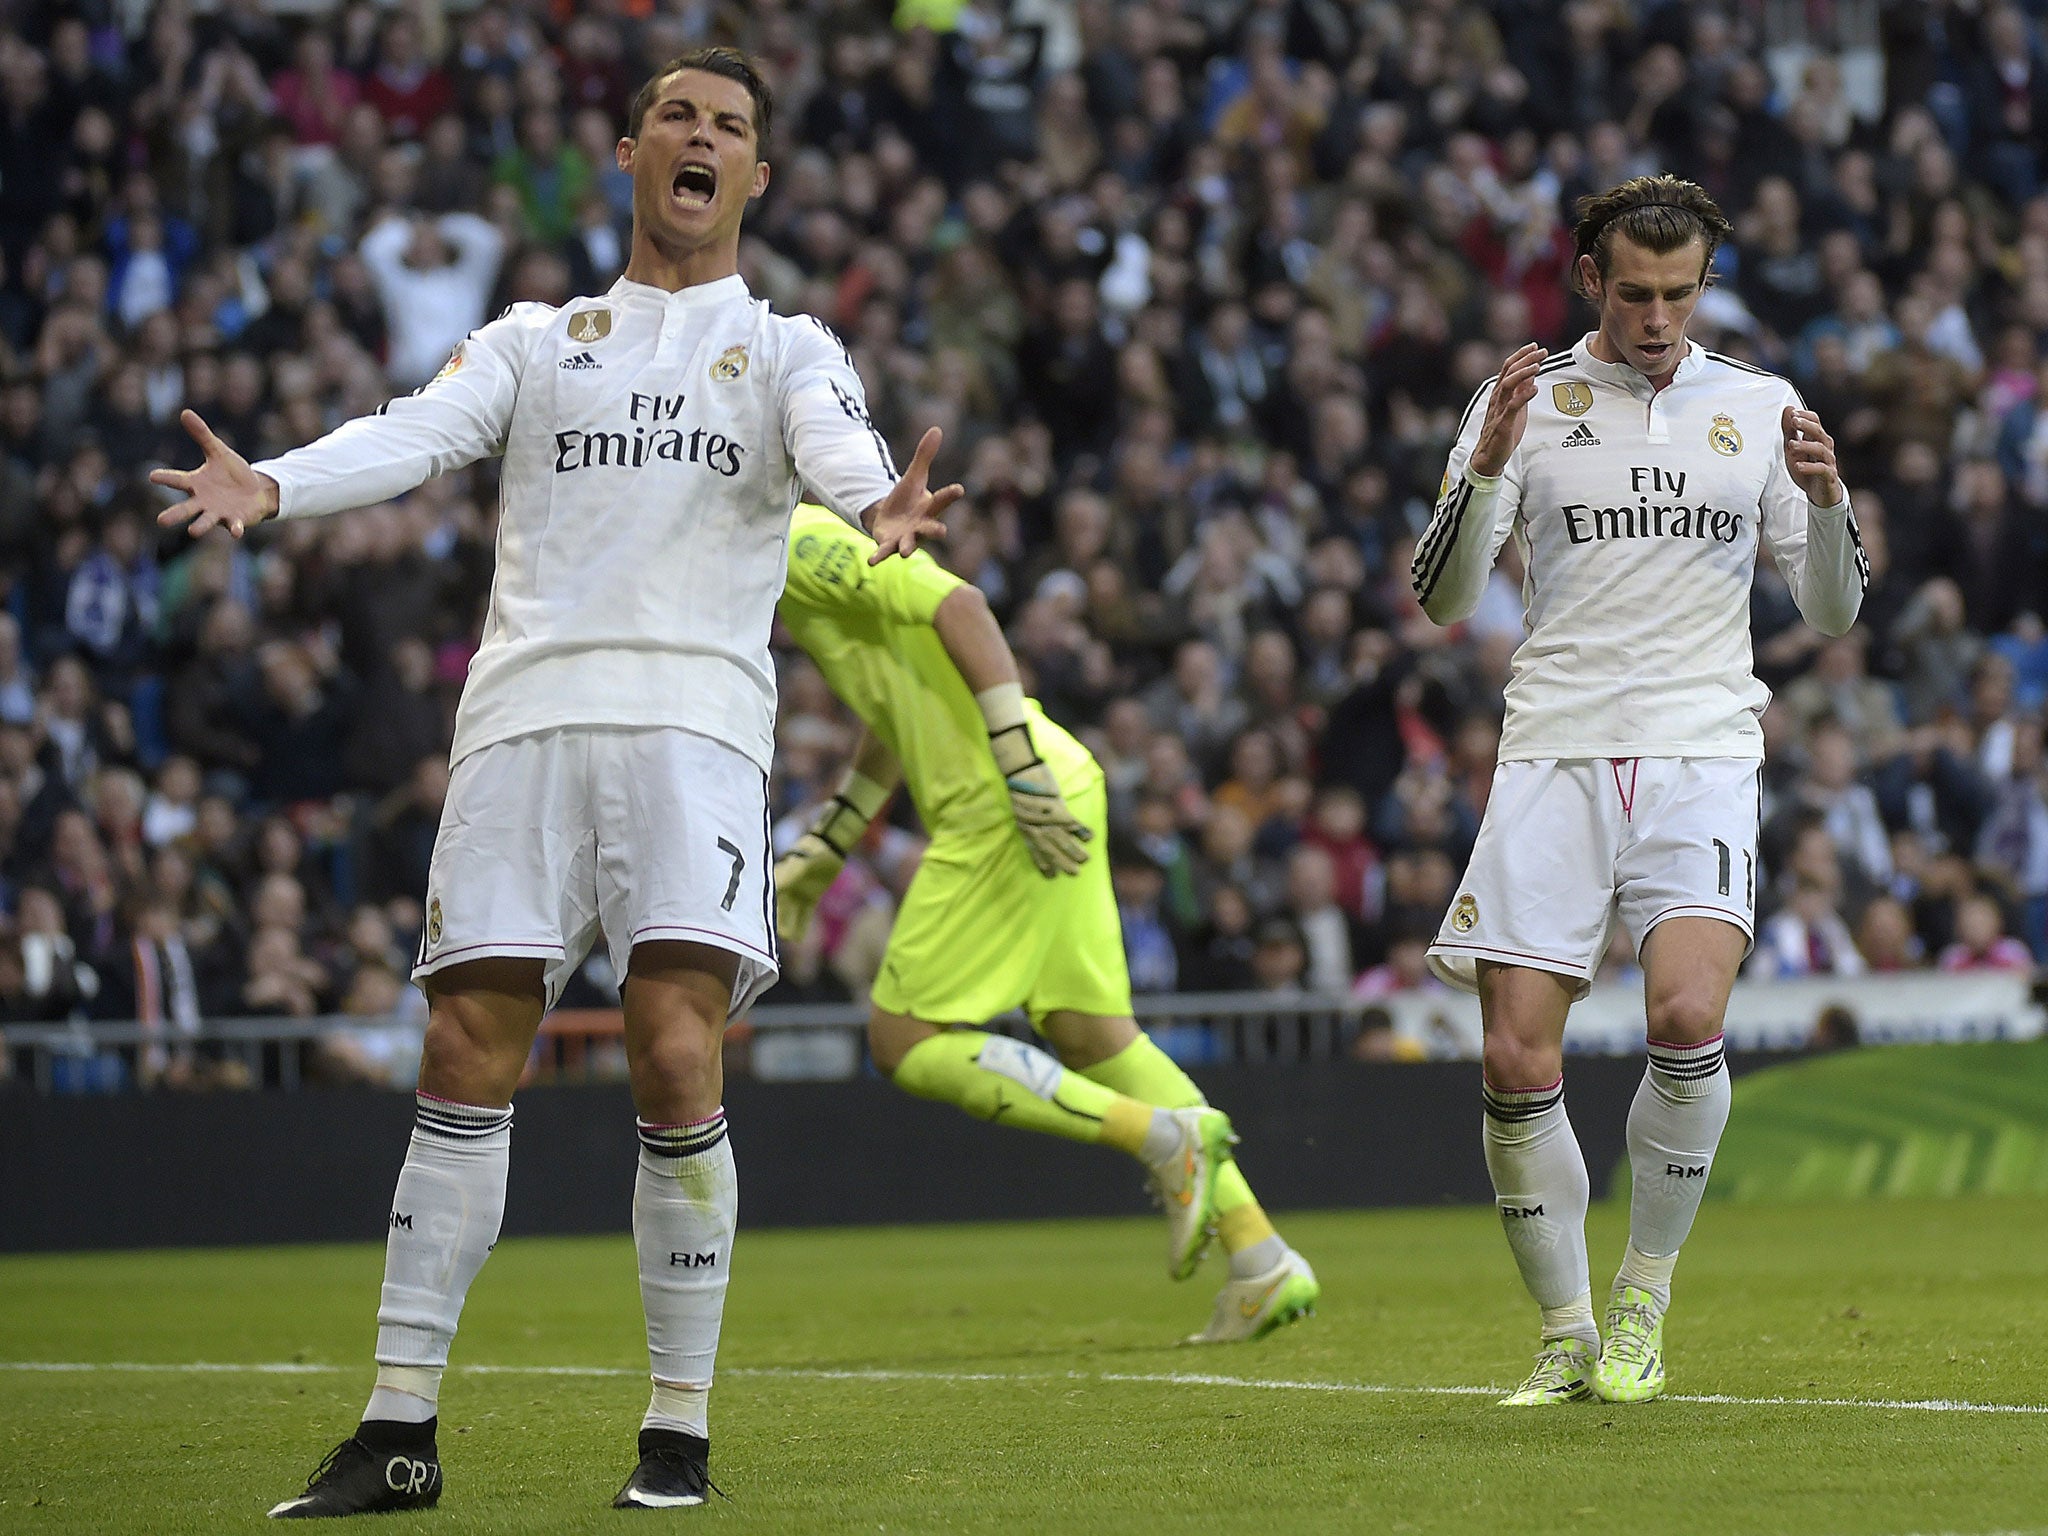 Cristiano Ronaldo gestures after Gareth Bale goes for goal instead of passing to him